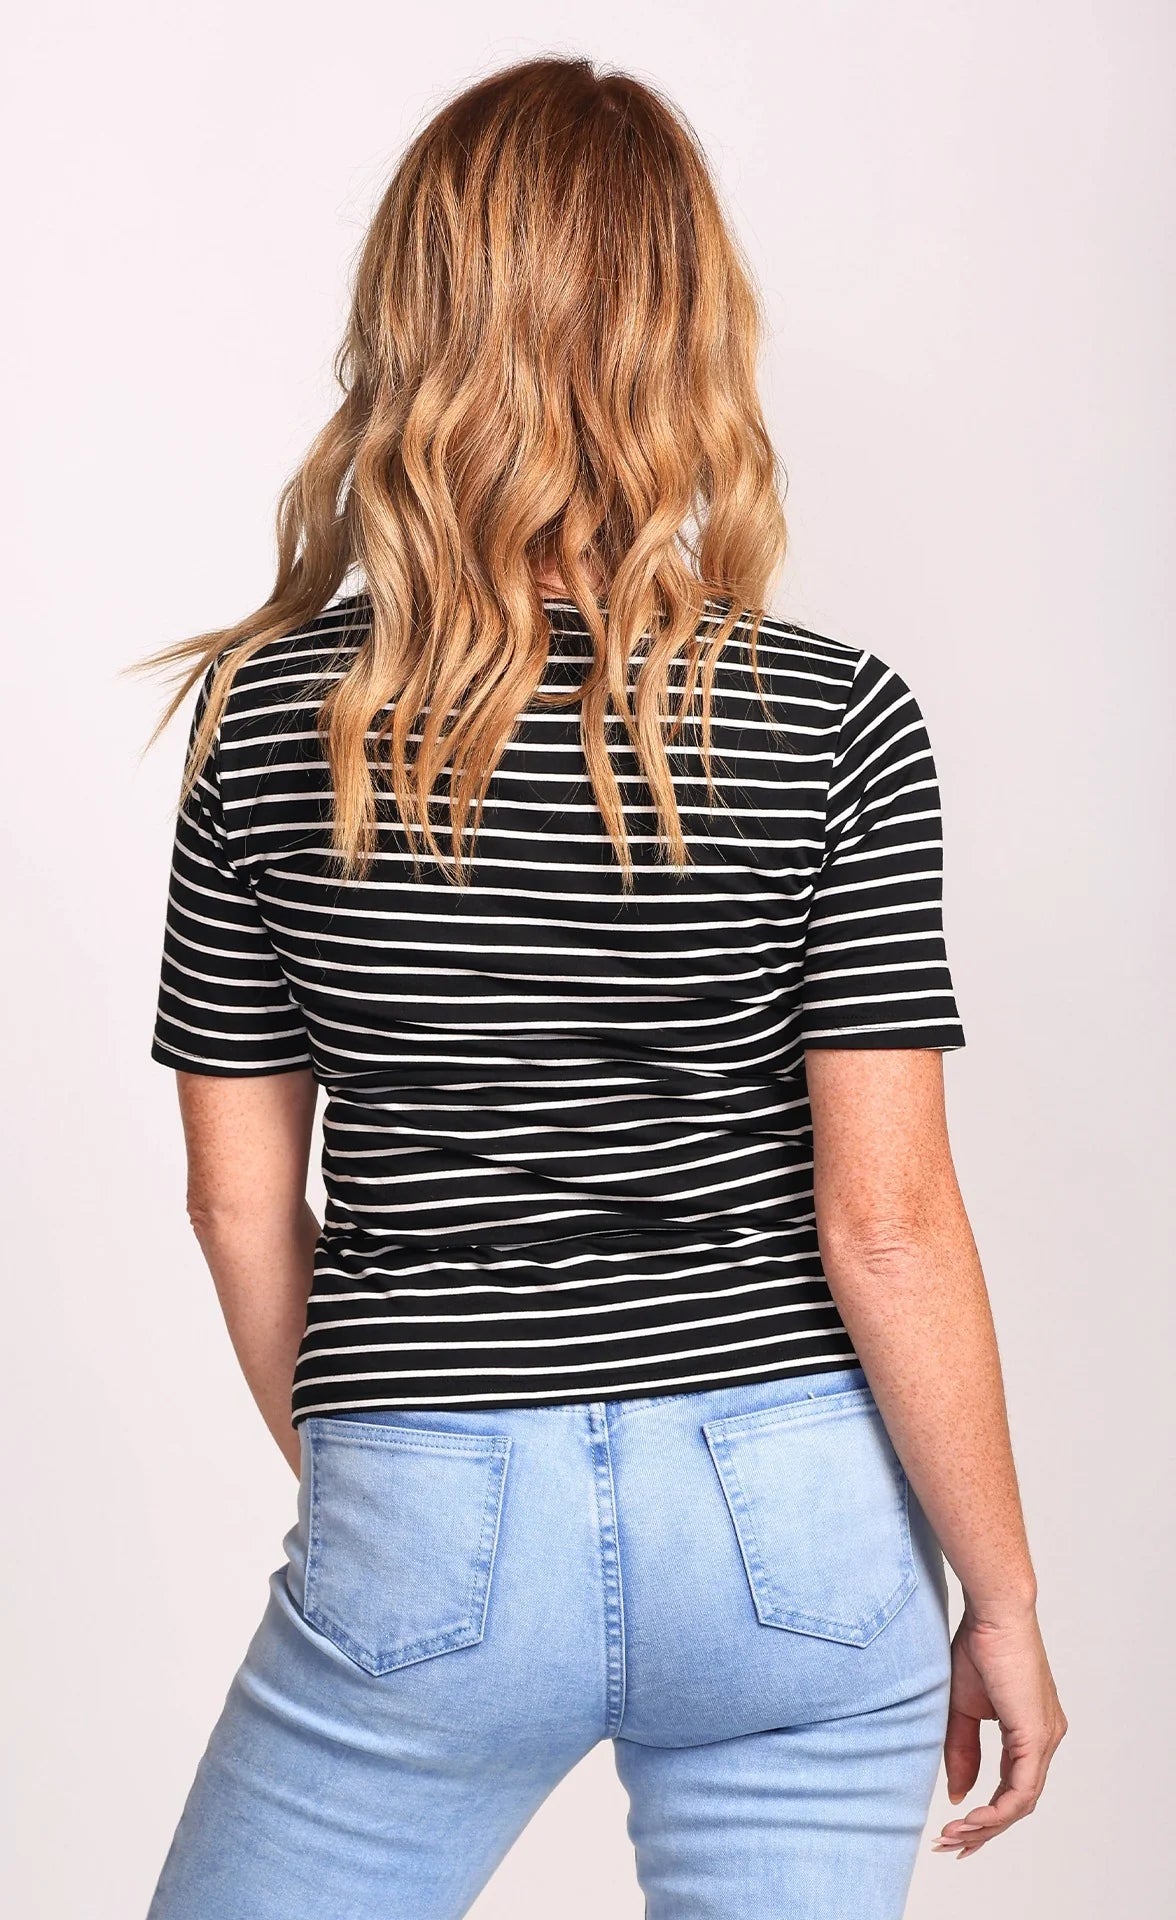 Maisy Stripe Top with 3/4 Sleeves - Black